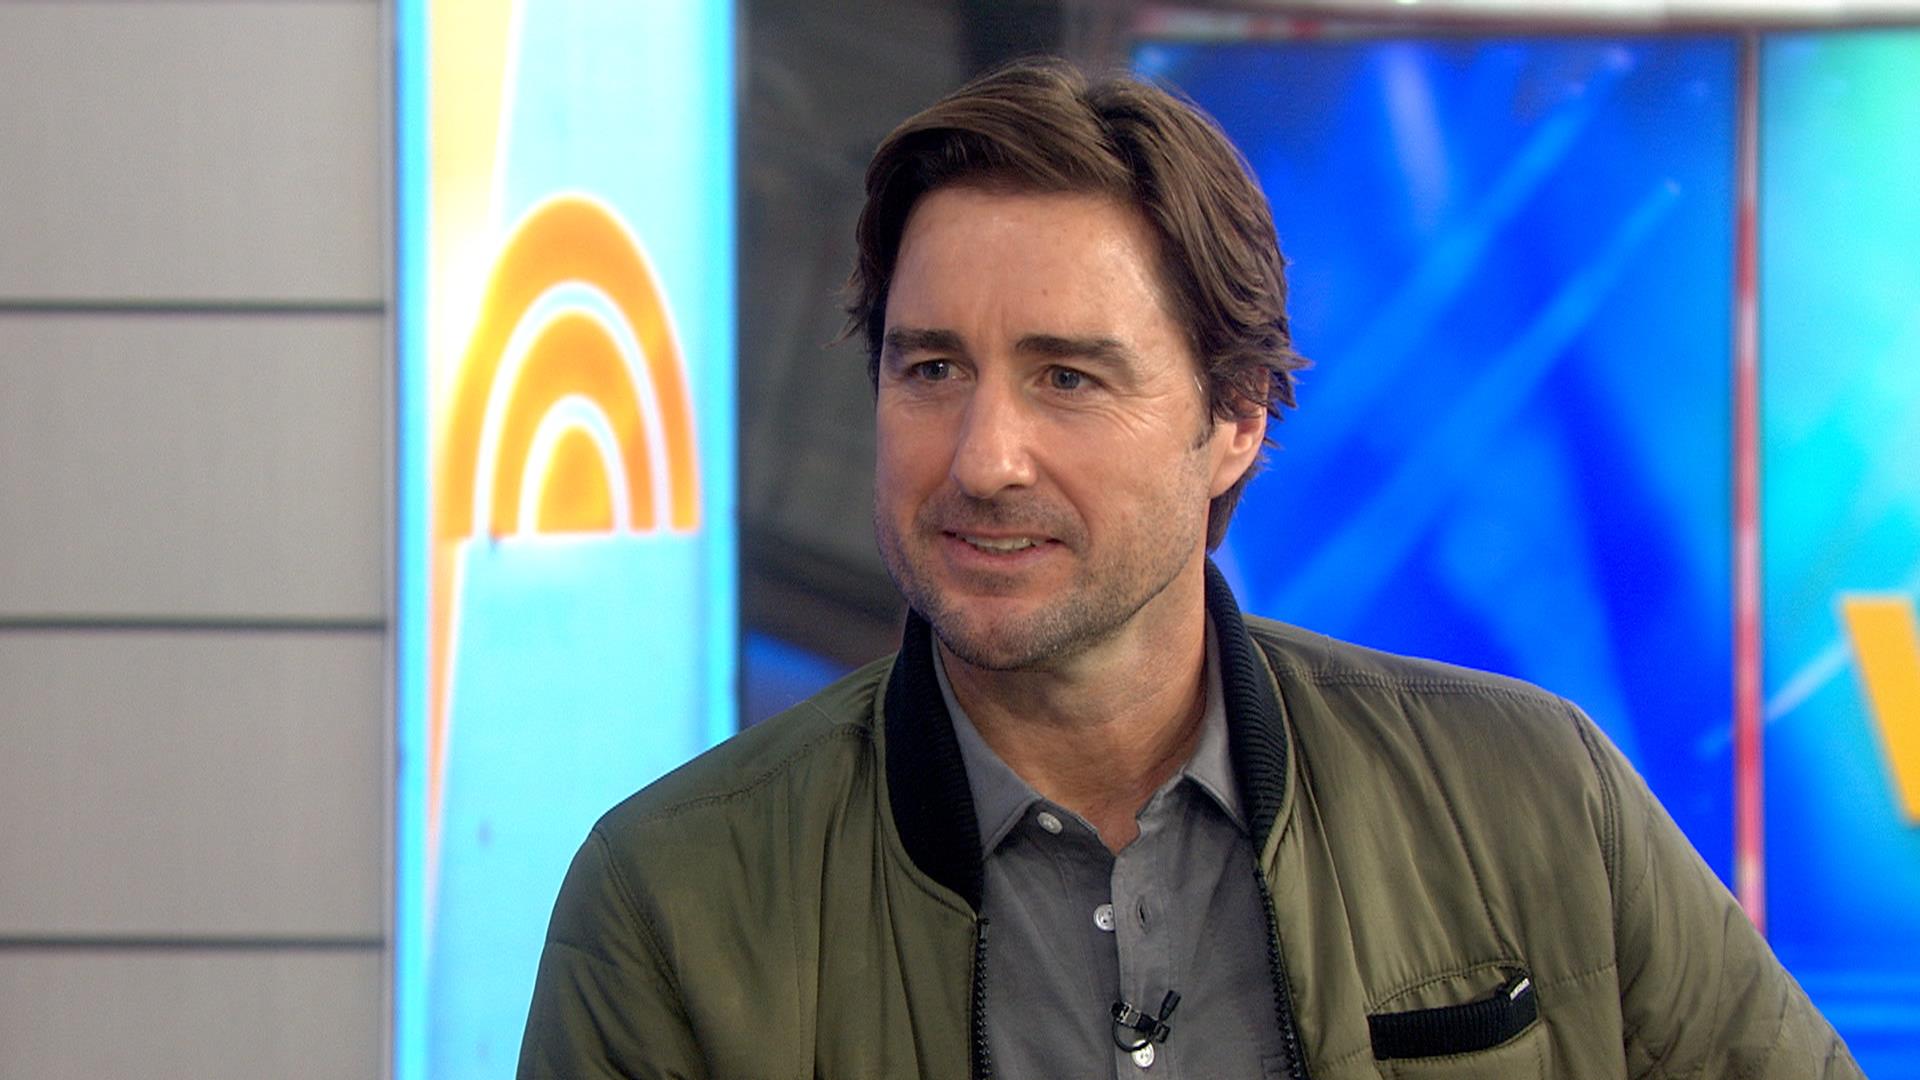 Luke Wilson on animated comedy 'Rock Dog' and reuniting with Tracy Morgan